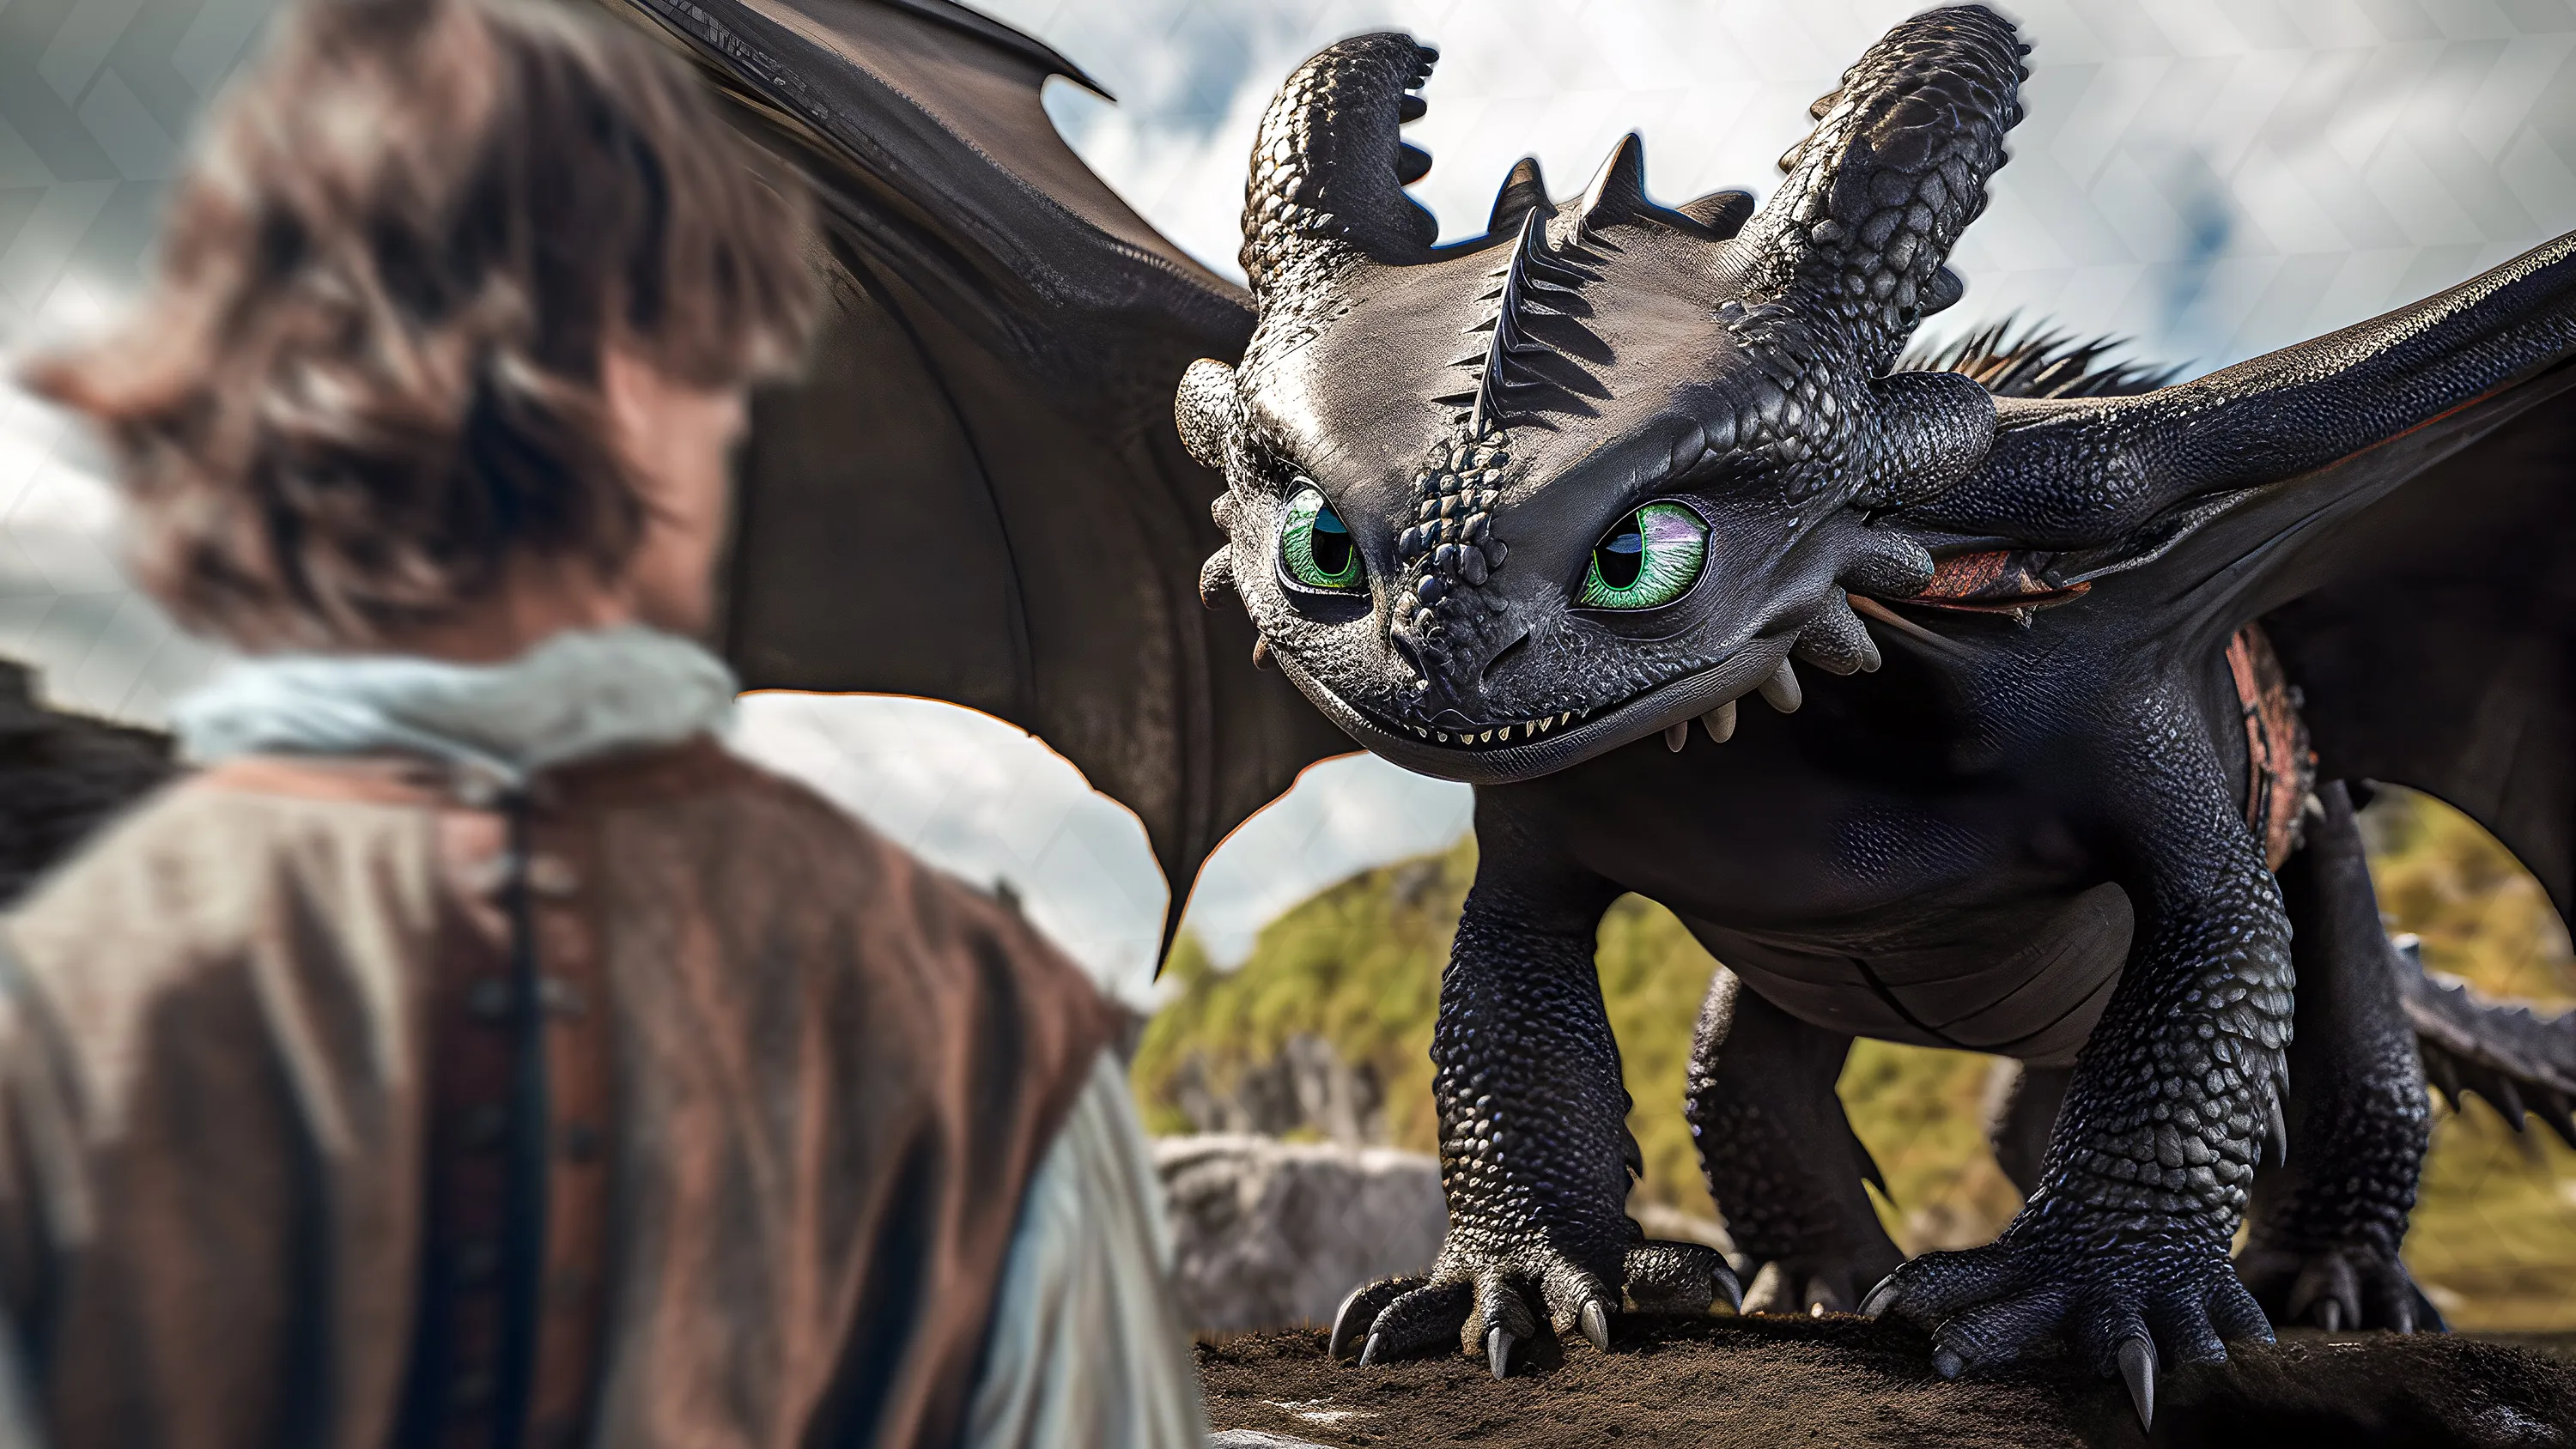 How to Train your Dragon Film Preview - Movie & Show News